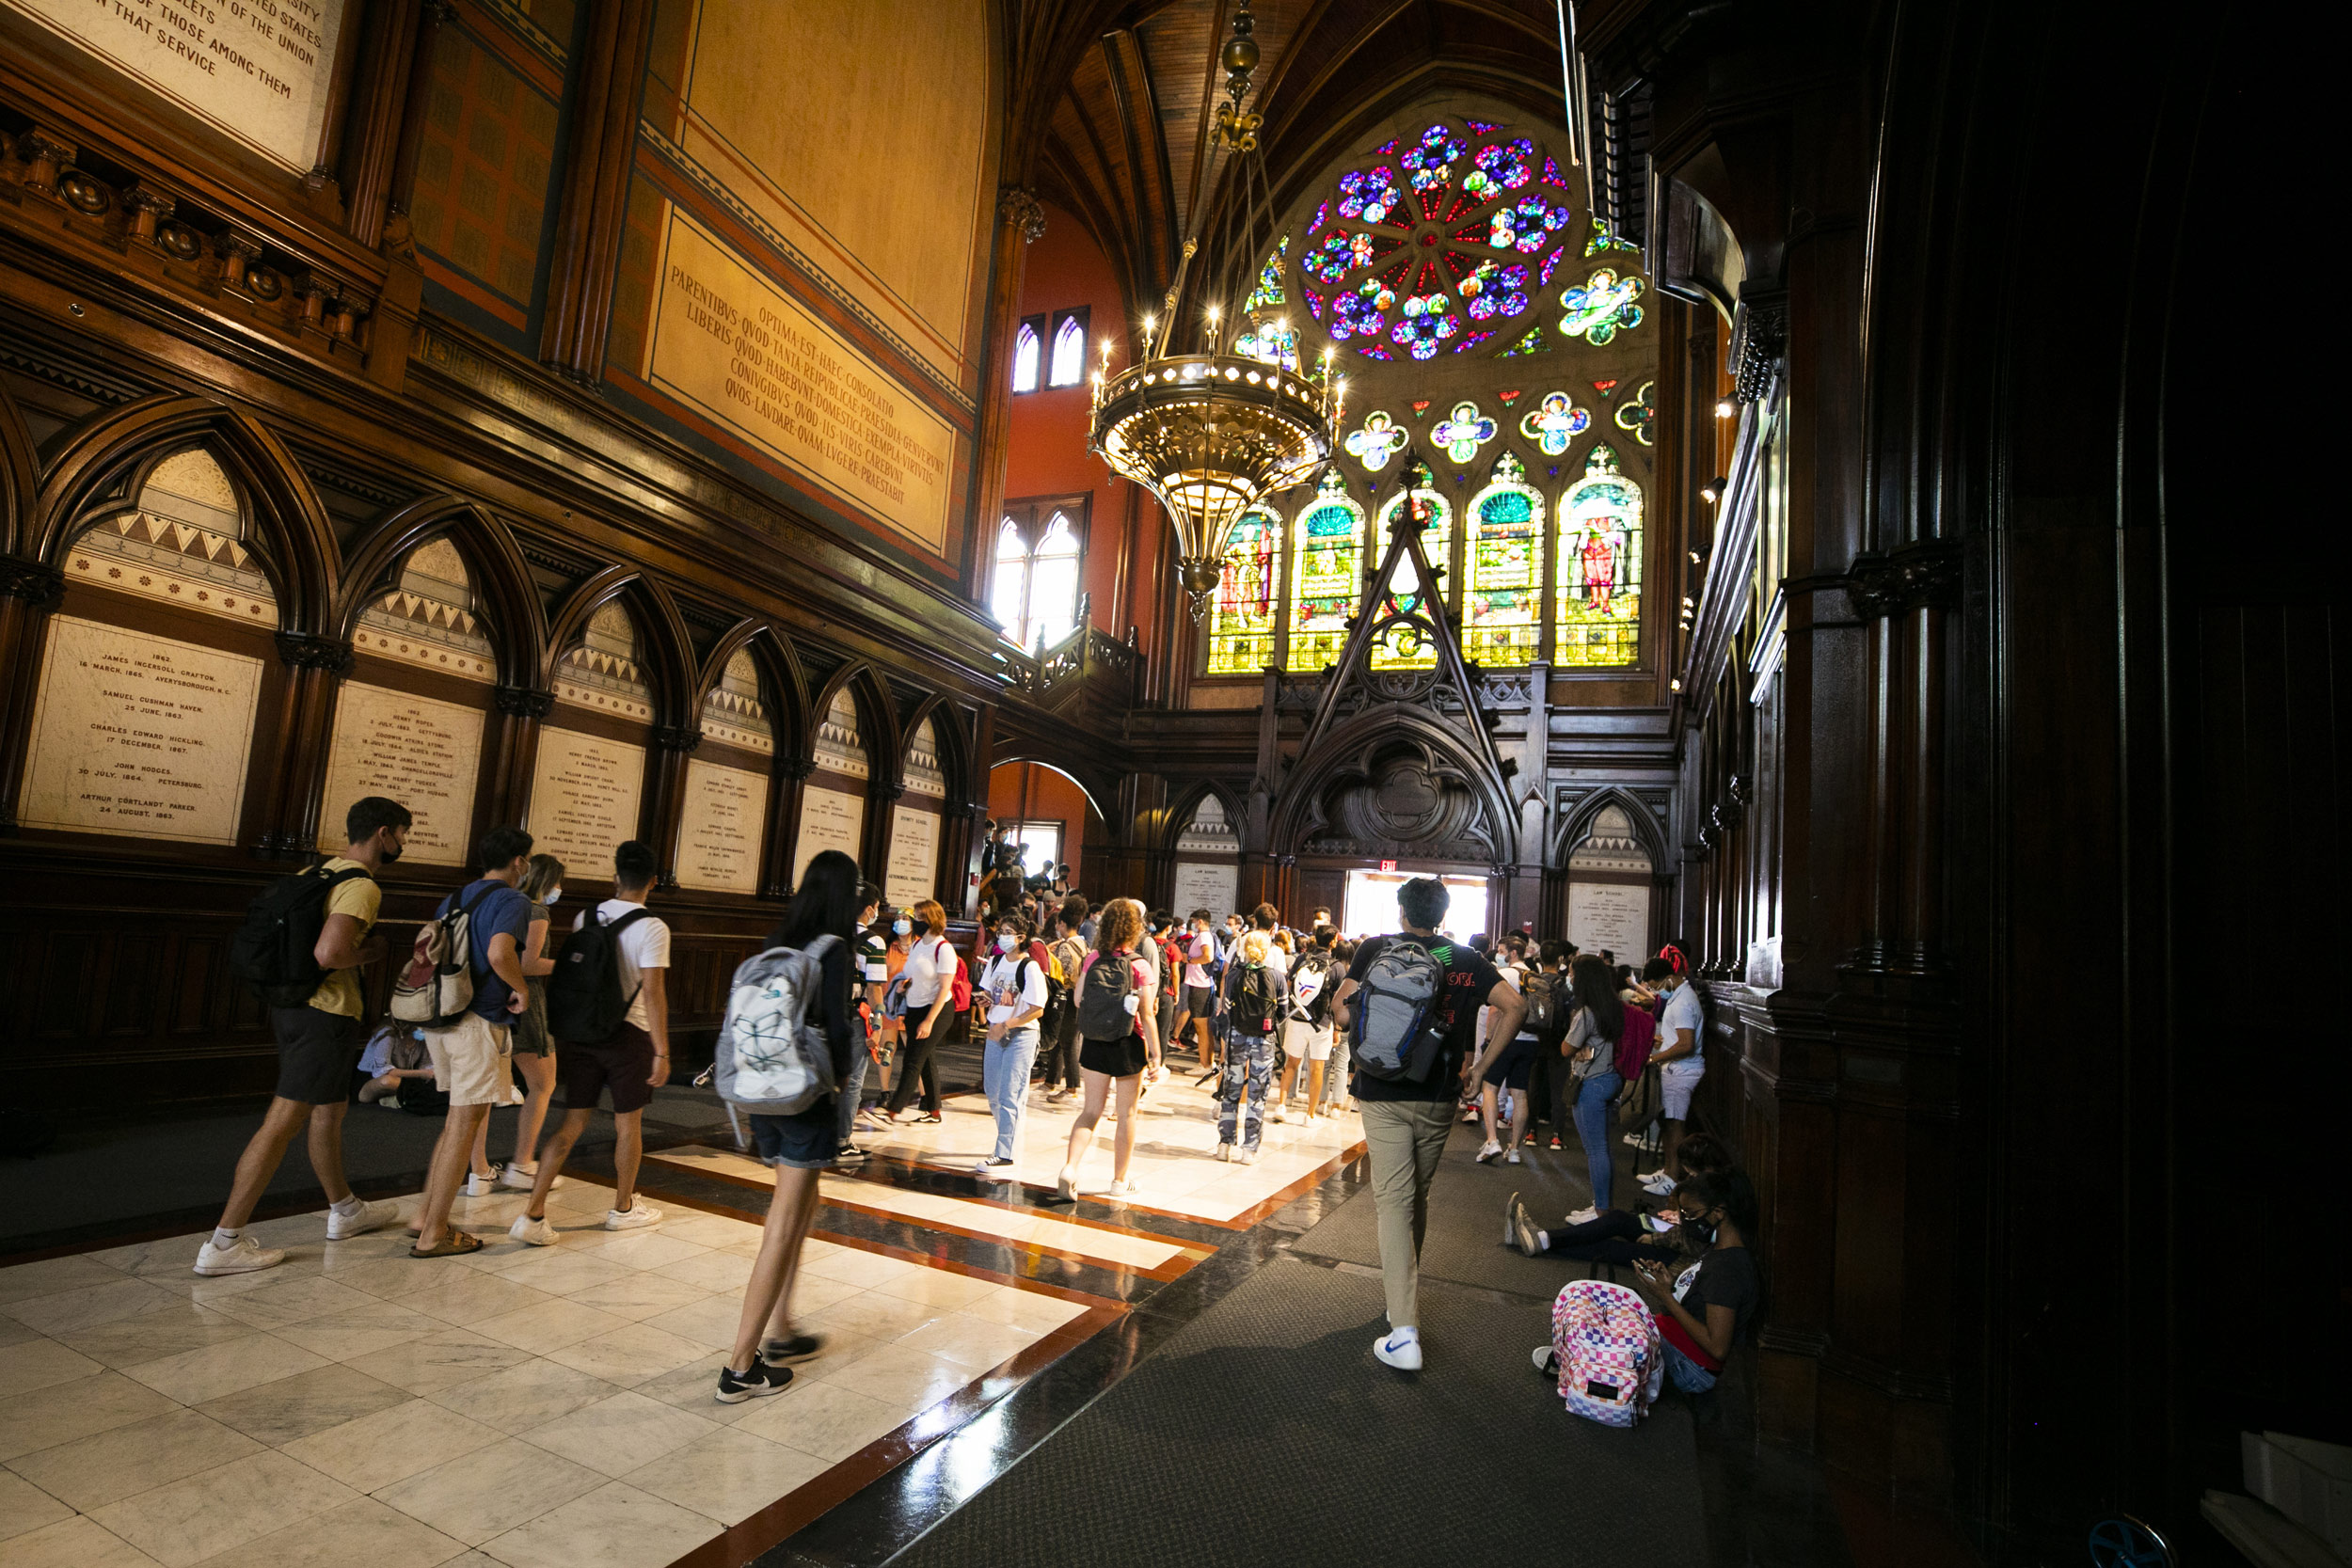 Students gather in the transept before heading into the lecture.